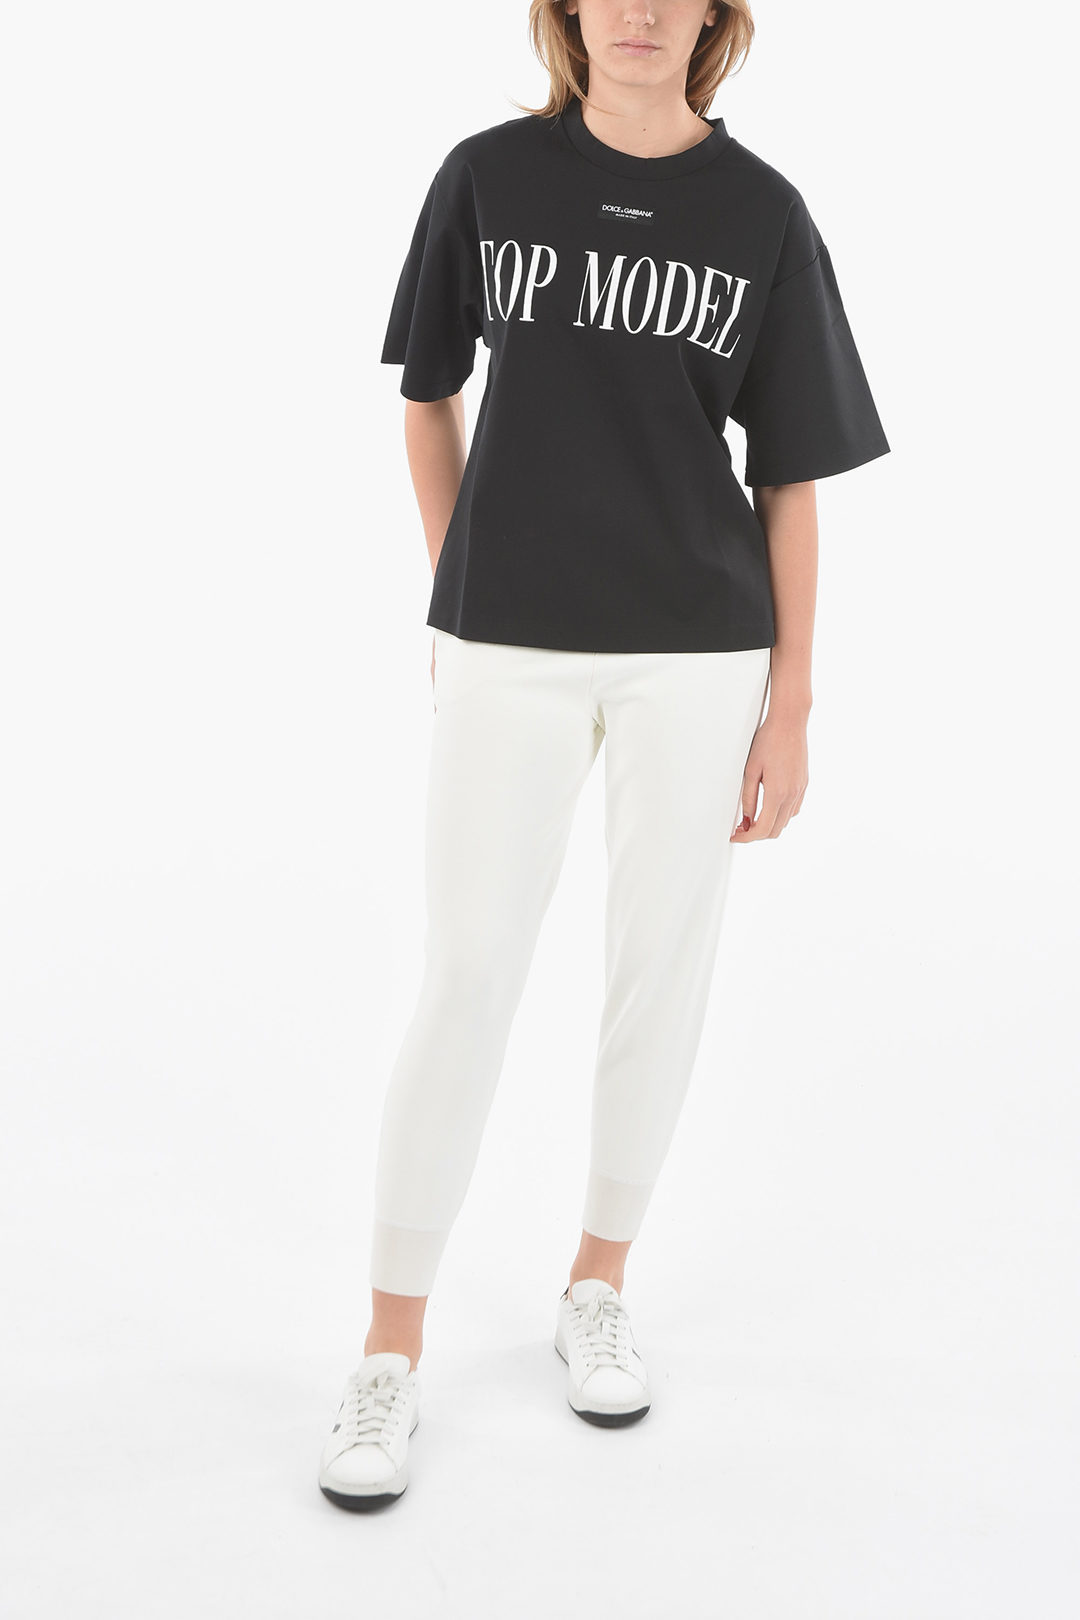 Crewneck Lettering women with T-shirt Outlet & - Dolce MODEL TOP Glamood Print Gabbana